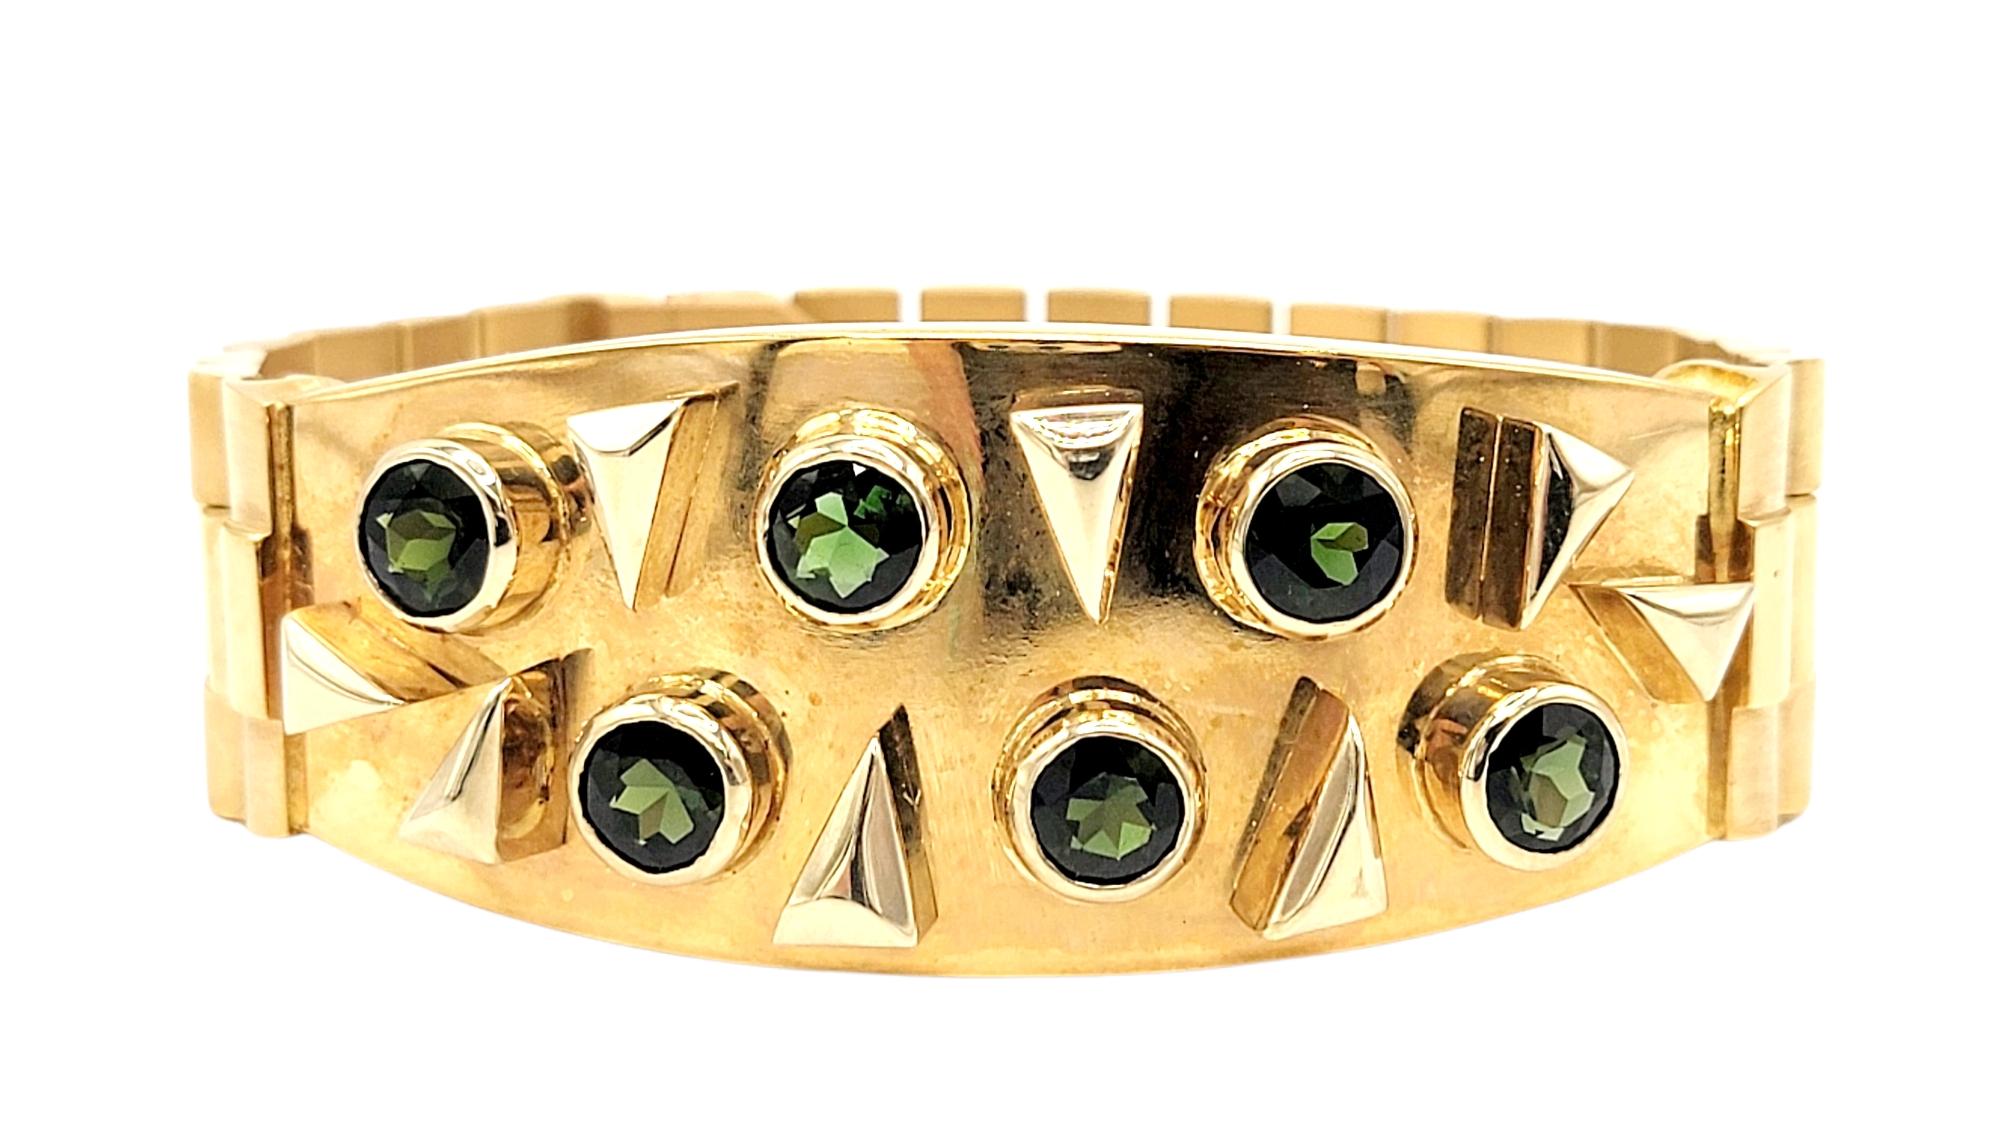 This eye-catching men's green tourmaline and 18 karat yellow gold watch link bracelet makes a bold and luxurious statement. The contemporary design of this impressive piece looks handsome on the wrist, really drawing the viewers attention to the